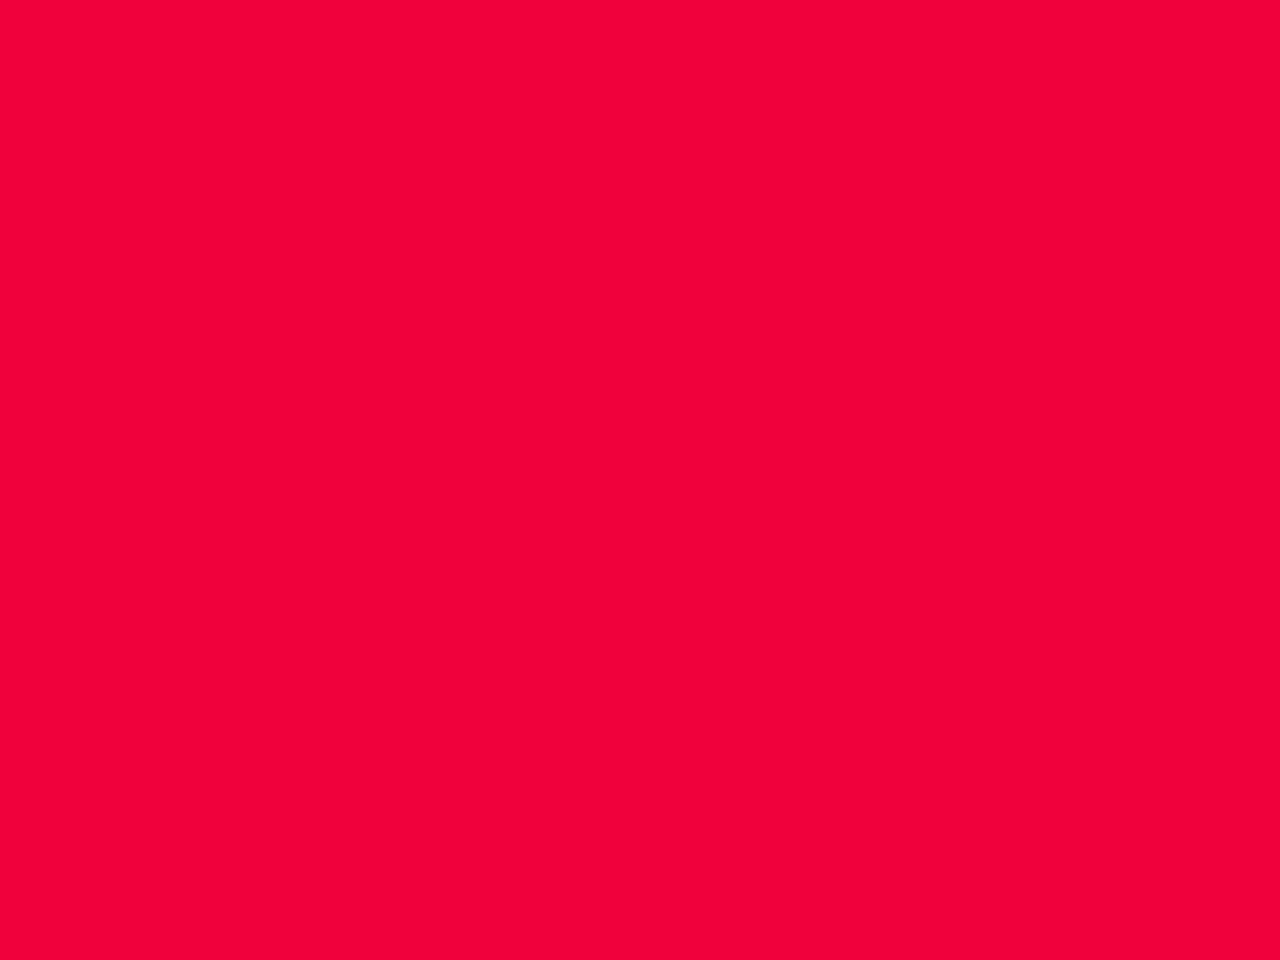 1280x960 Red Munsell Solid Color Background